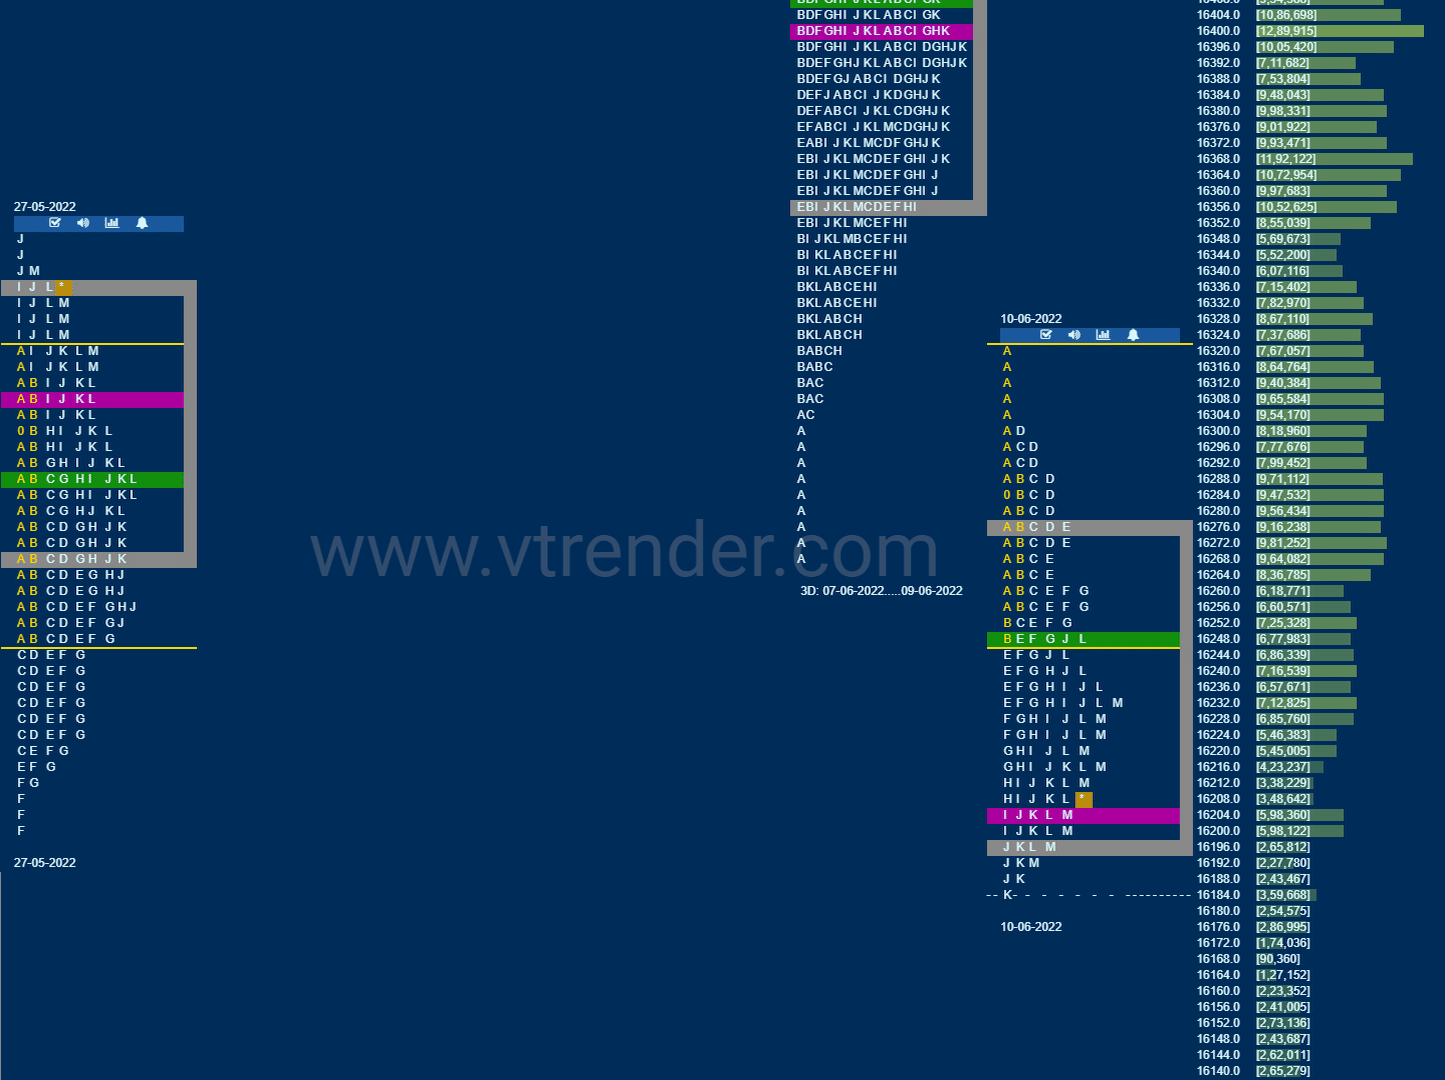 Nf 8 Market Profile Analysis Dated 10Th Jun 2022 Banknifty Futures, Charts, Day Trading, Intraday Trading, Intraday Trading Strategies, Market Profile, Market Profile Trading Strategies, Nifty Futures, Order Flow Analysis, Support And Resistance, Technical Analysis, Trading Strategies, Volume Profile Trading